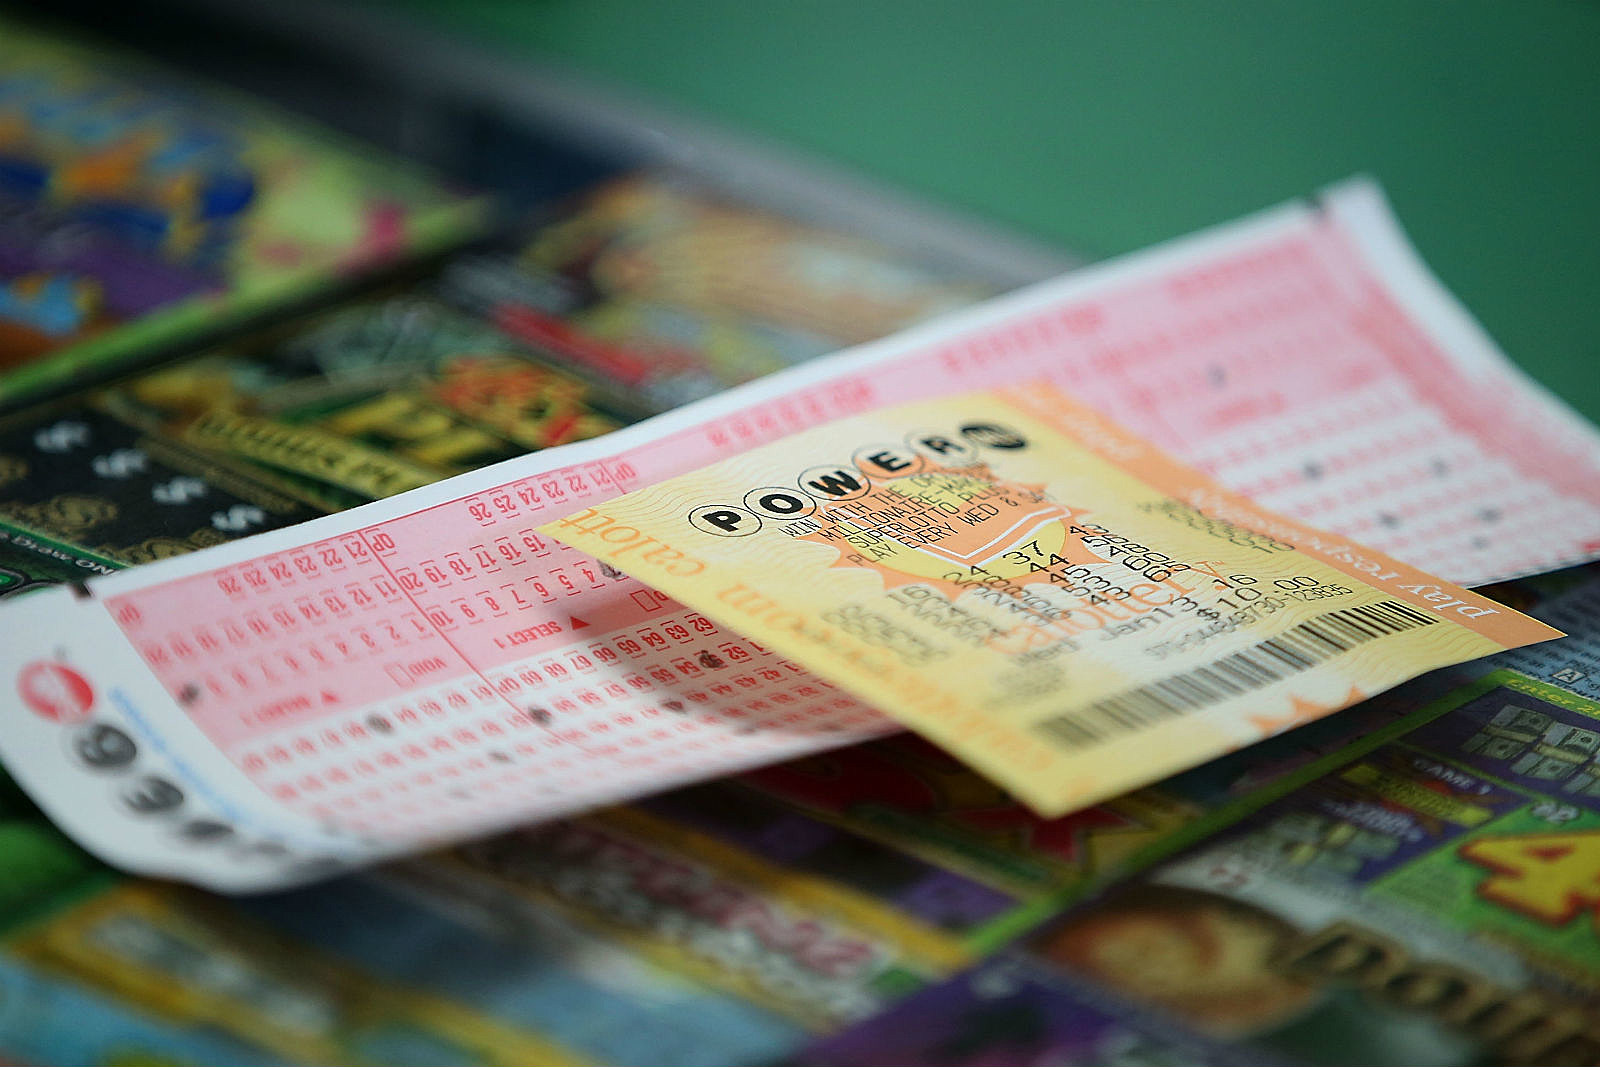 cut off time for buying lotto tickets